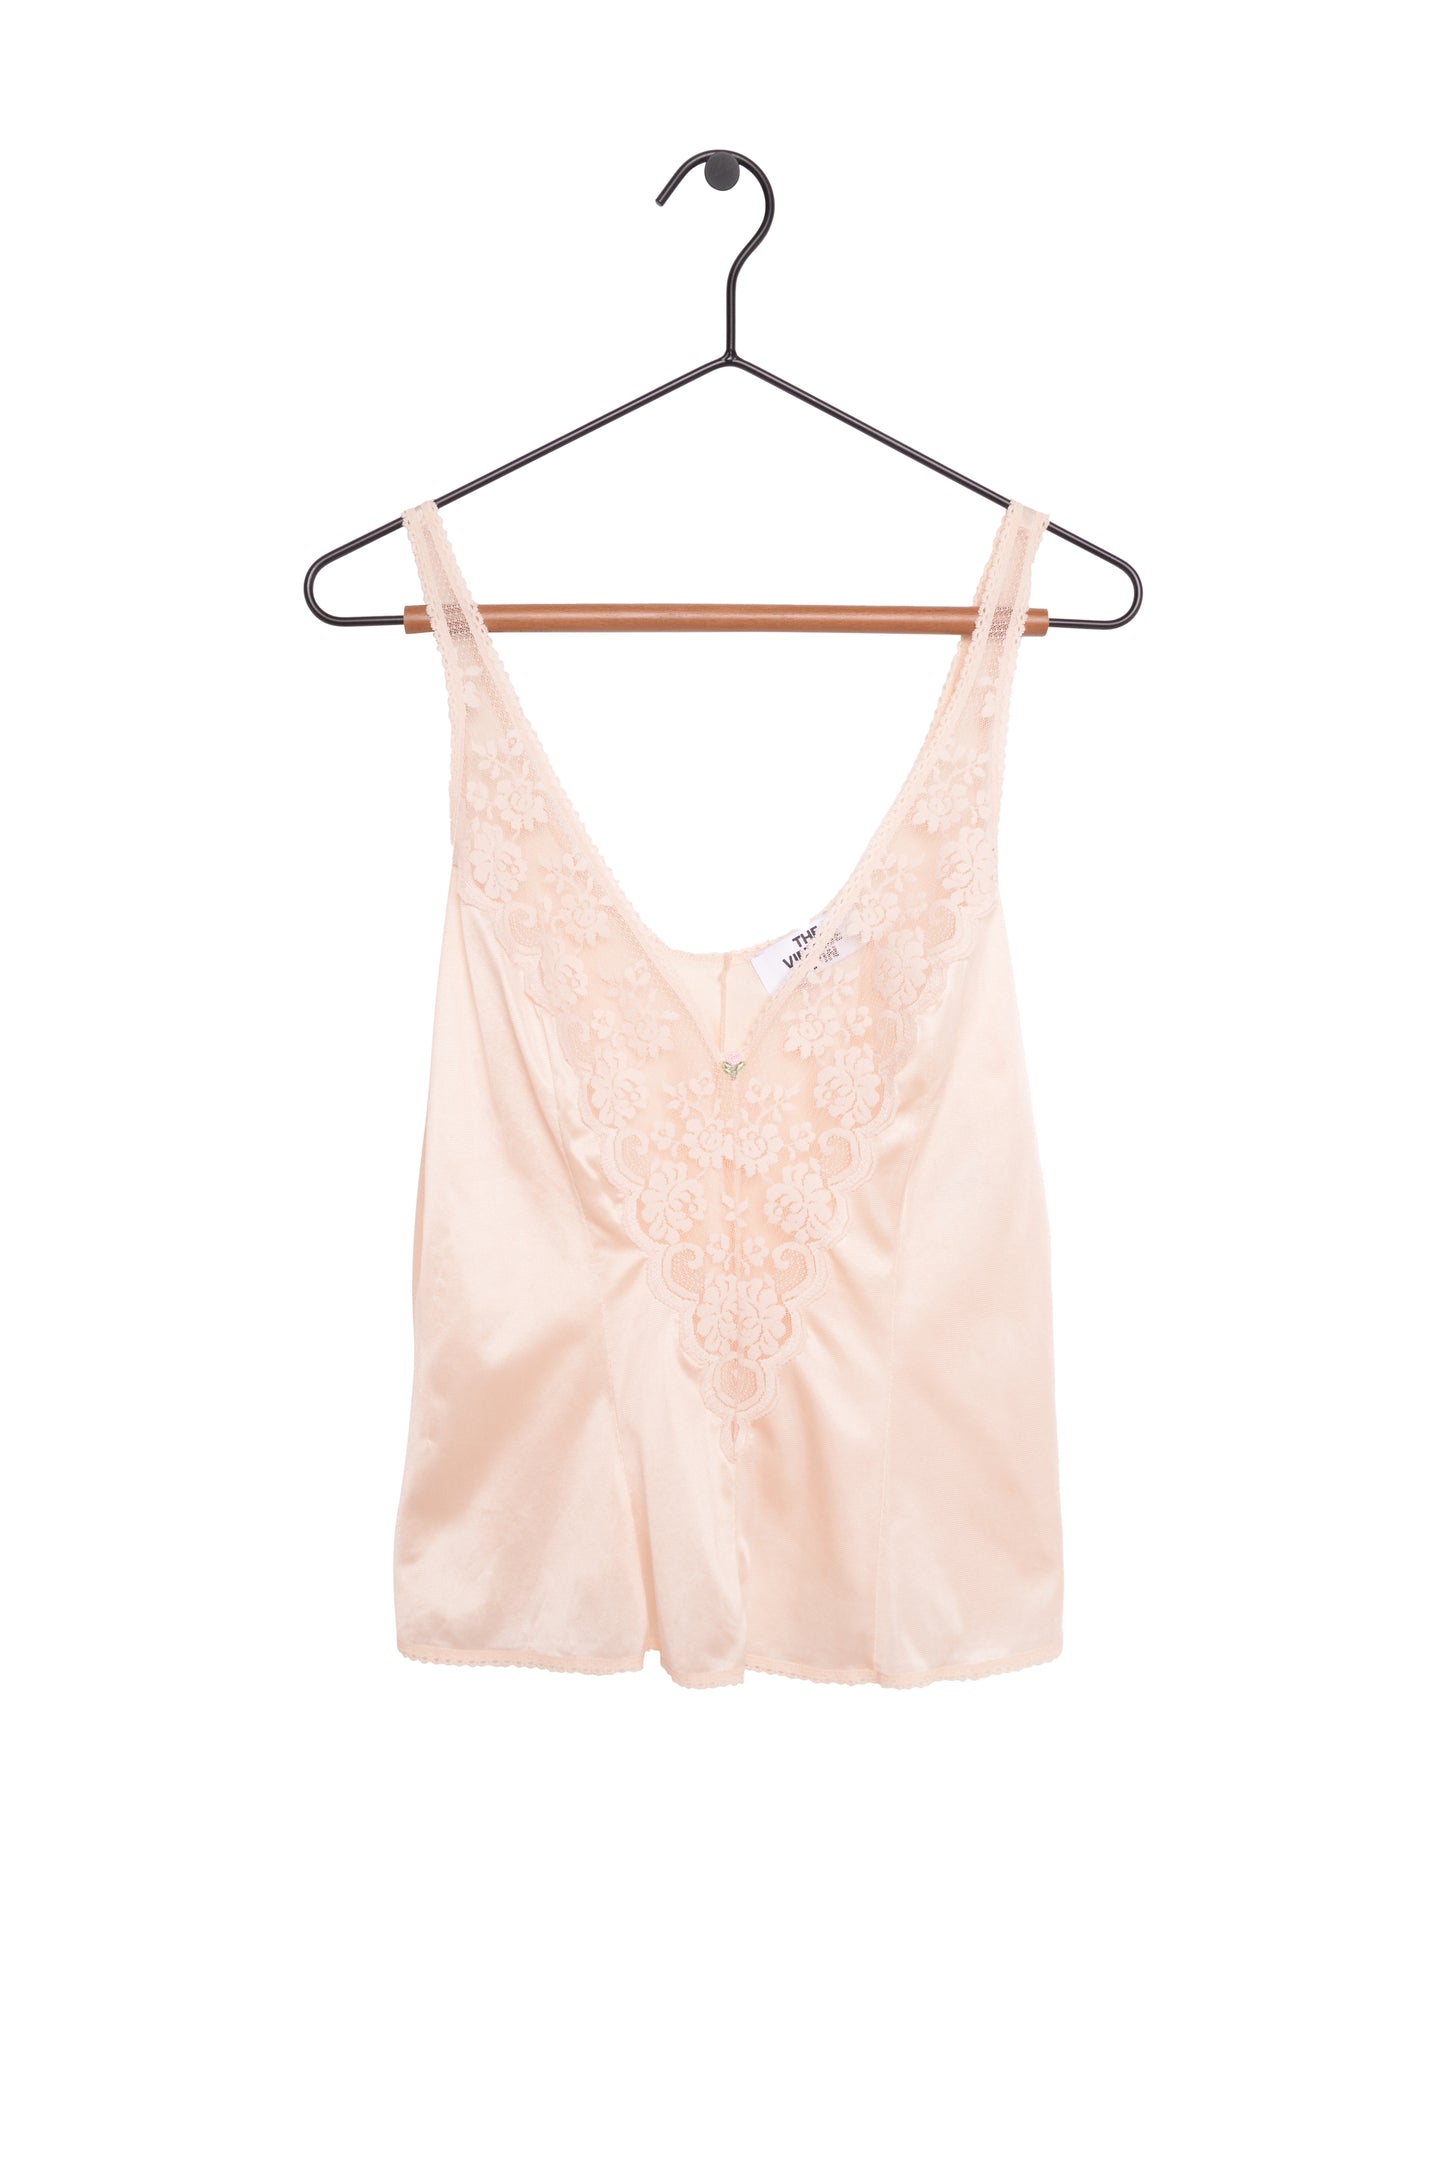 1950s Lace Slip Top USA